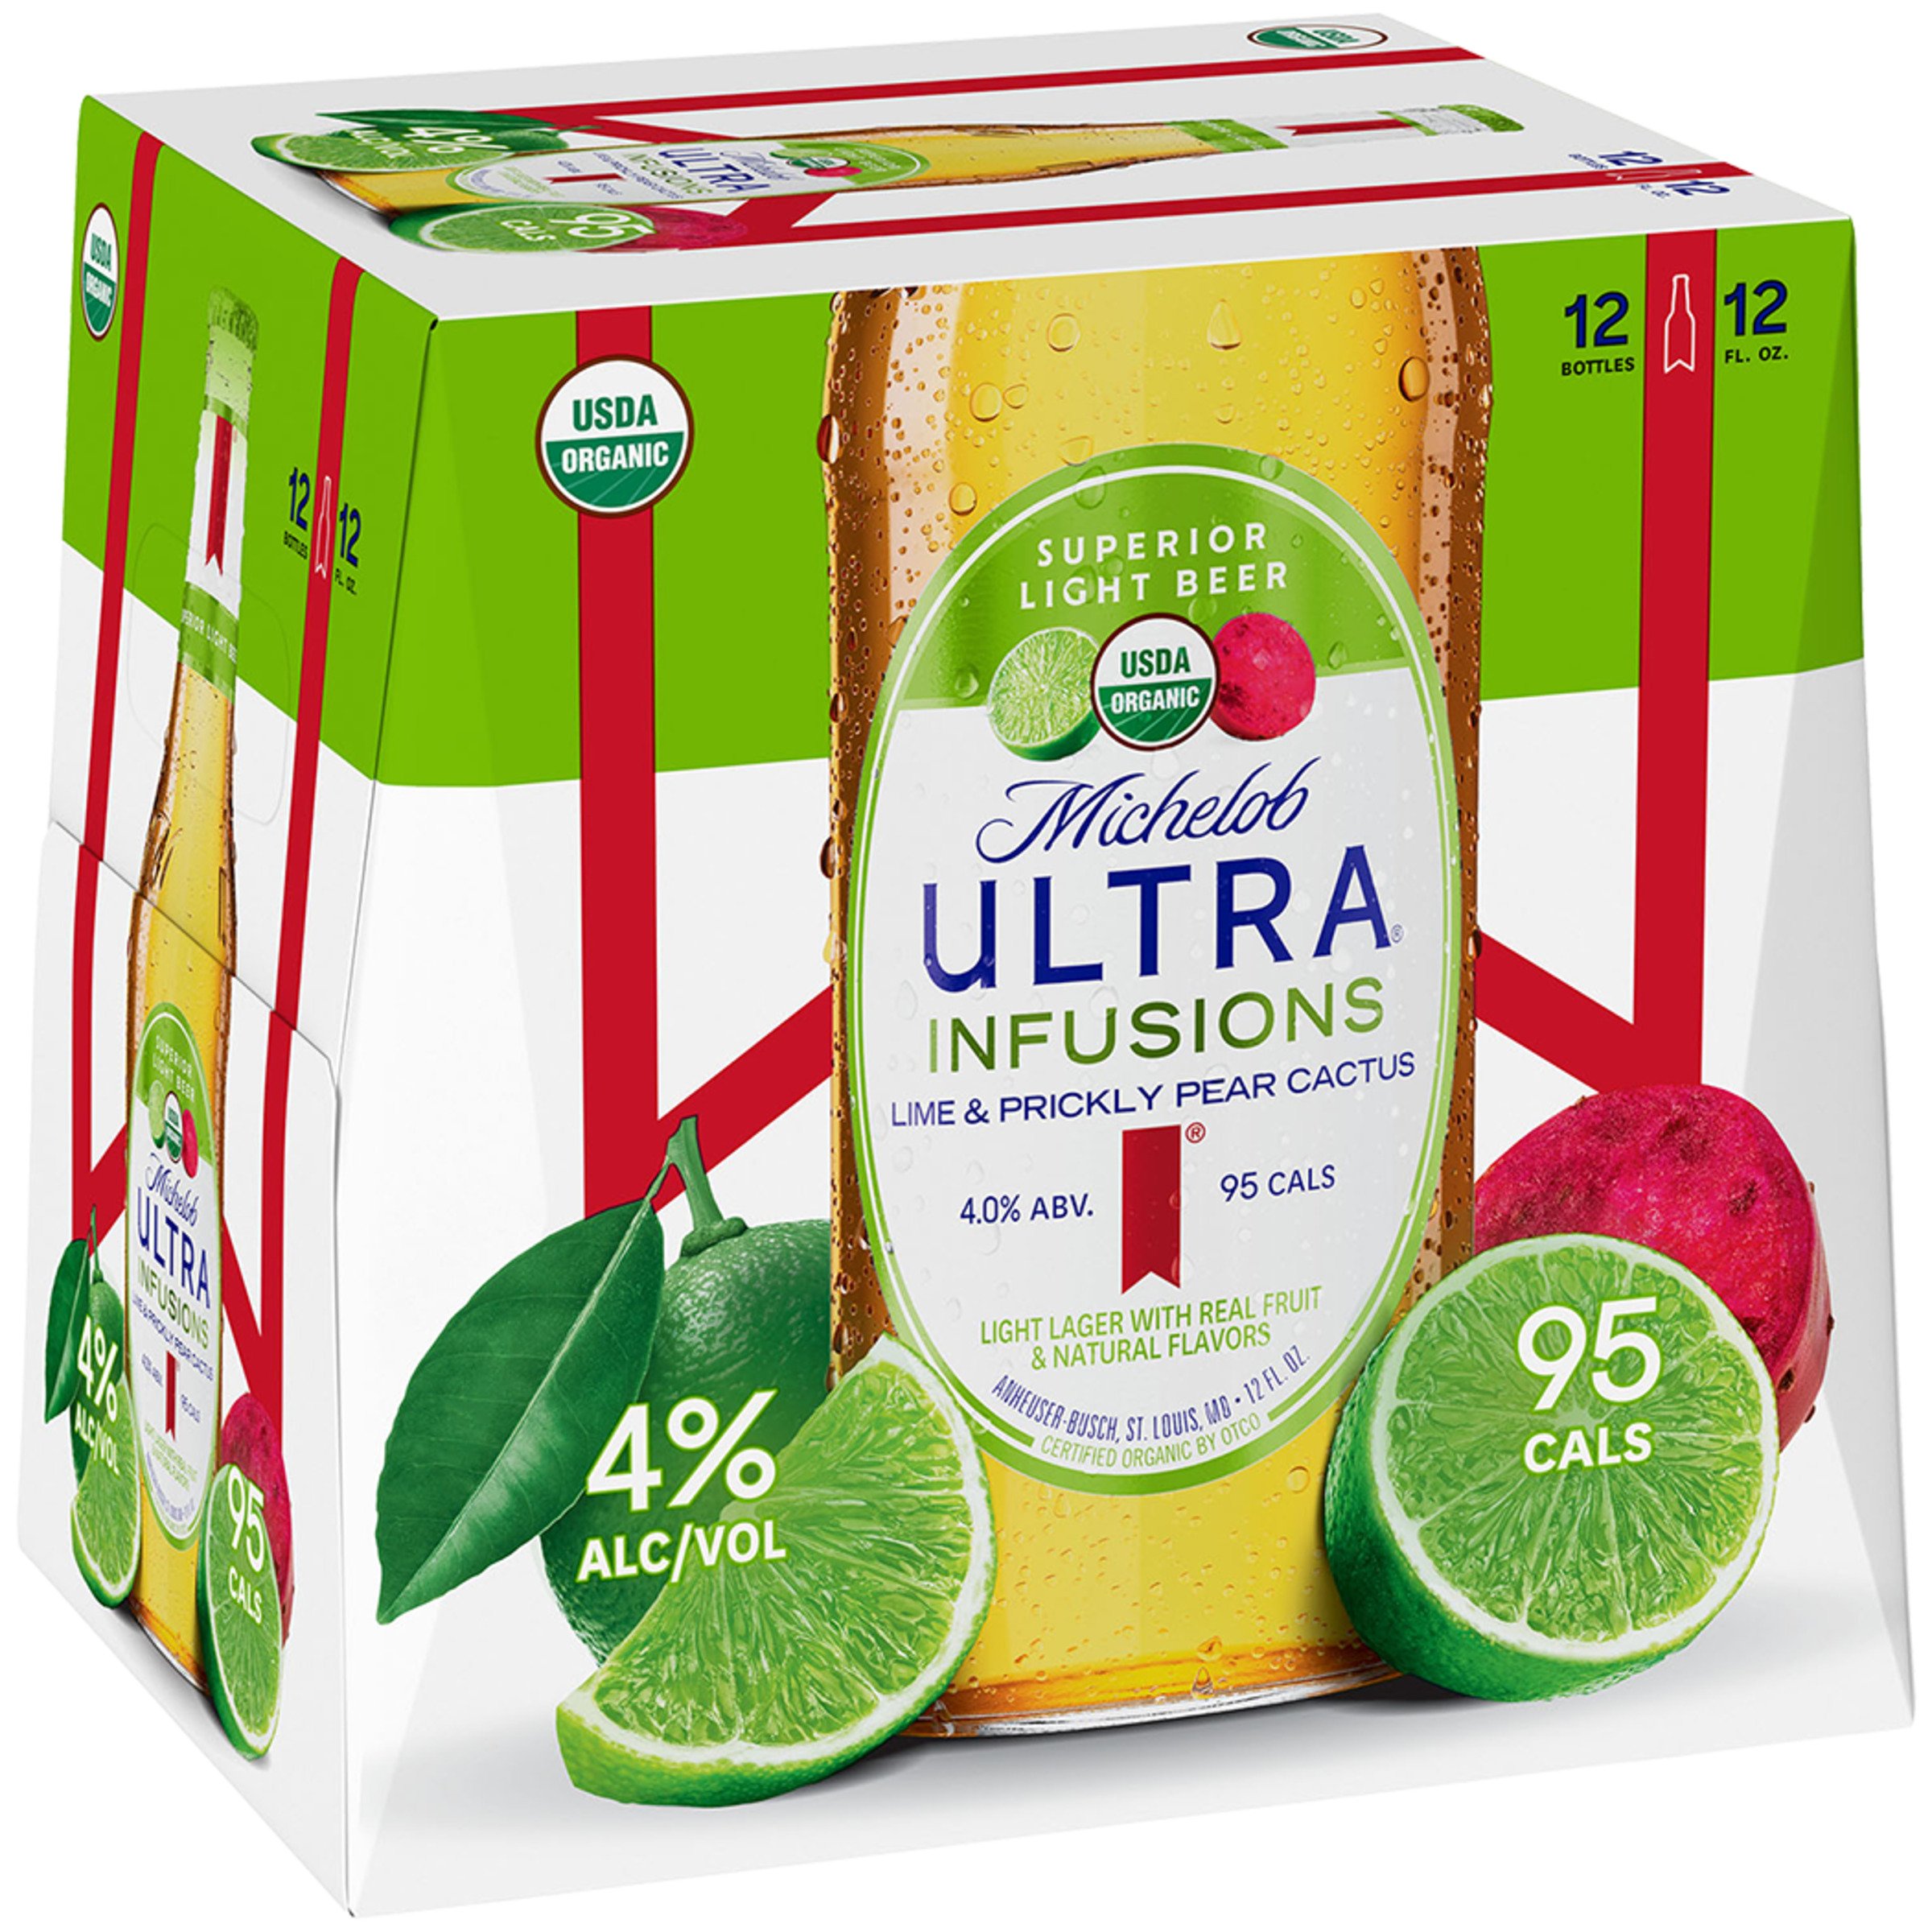 Michelob Ultra Infusions Lime And Prickly Pear Cactus Beer 12 Oz Bottles